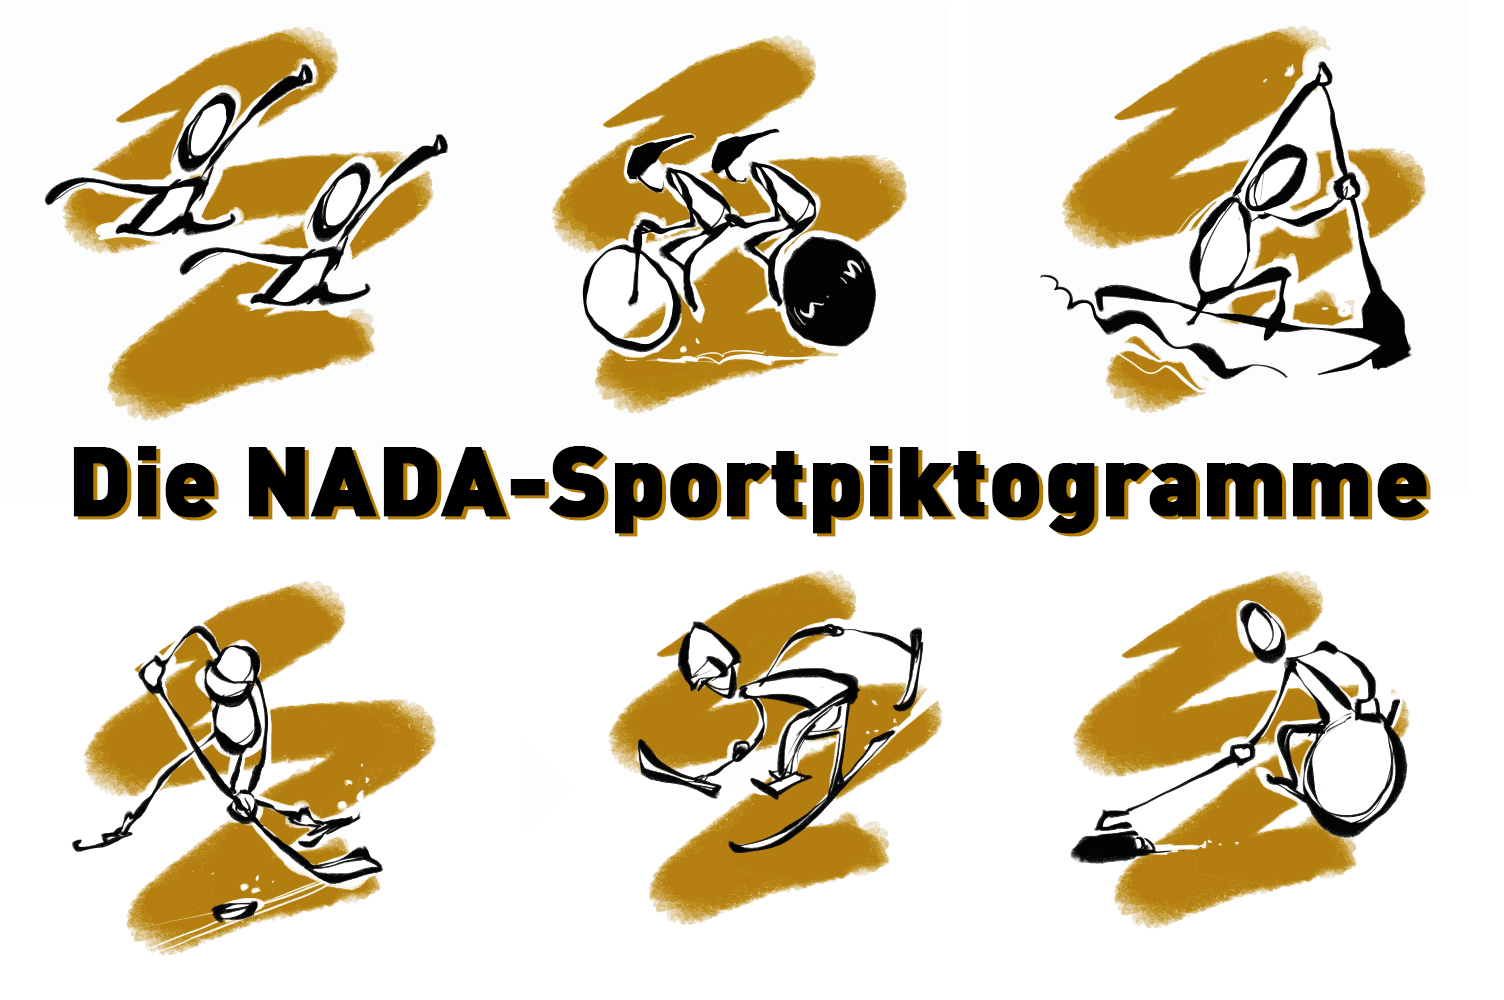 Pictograms for clean sport